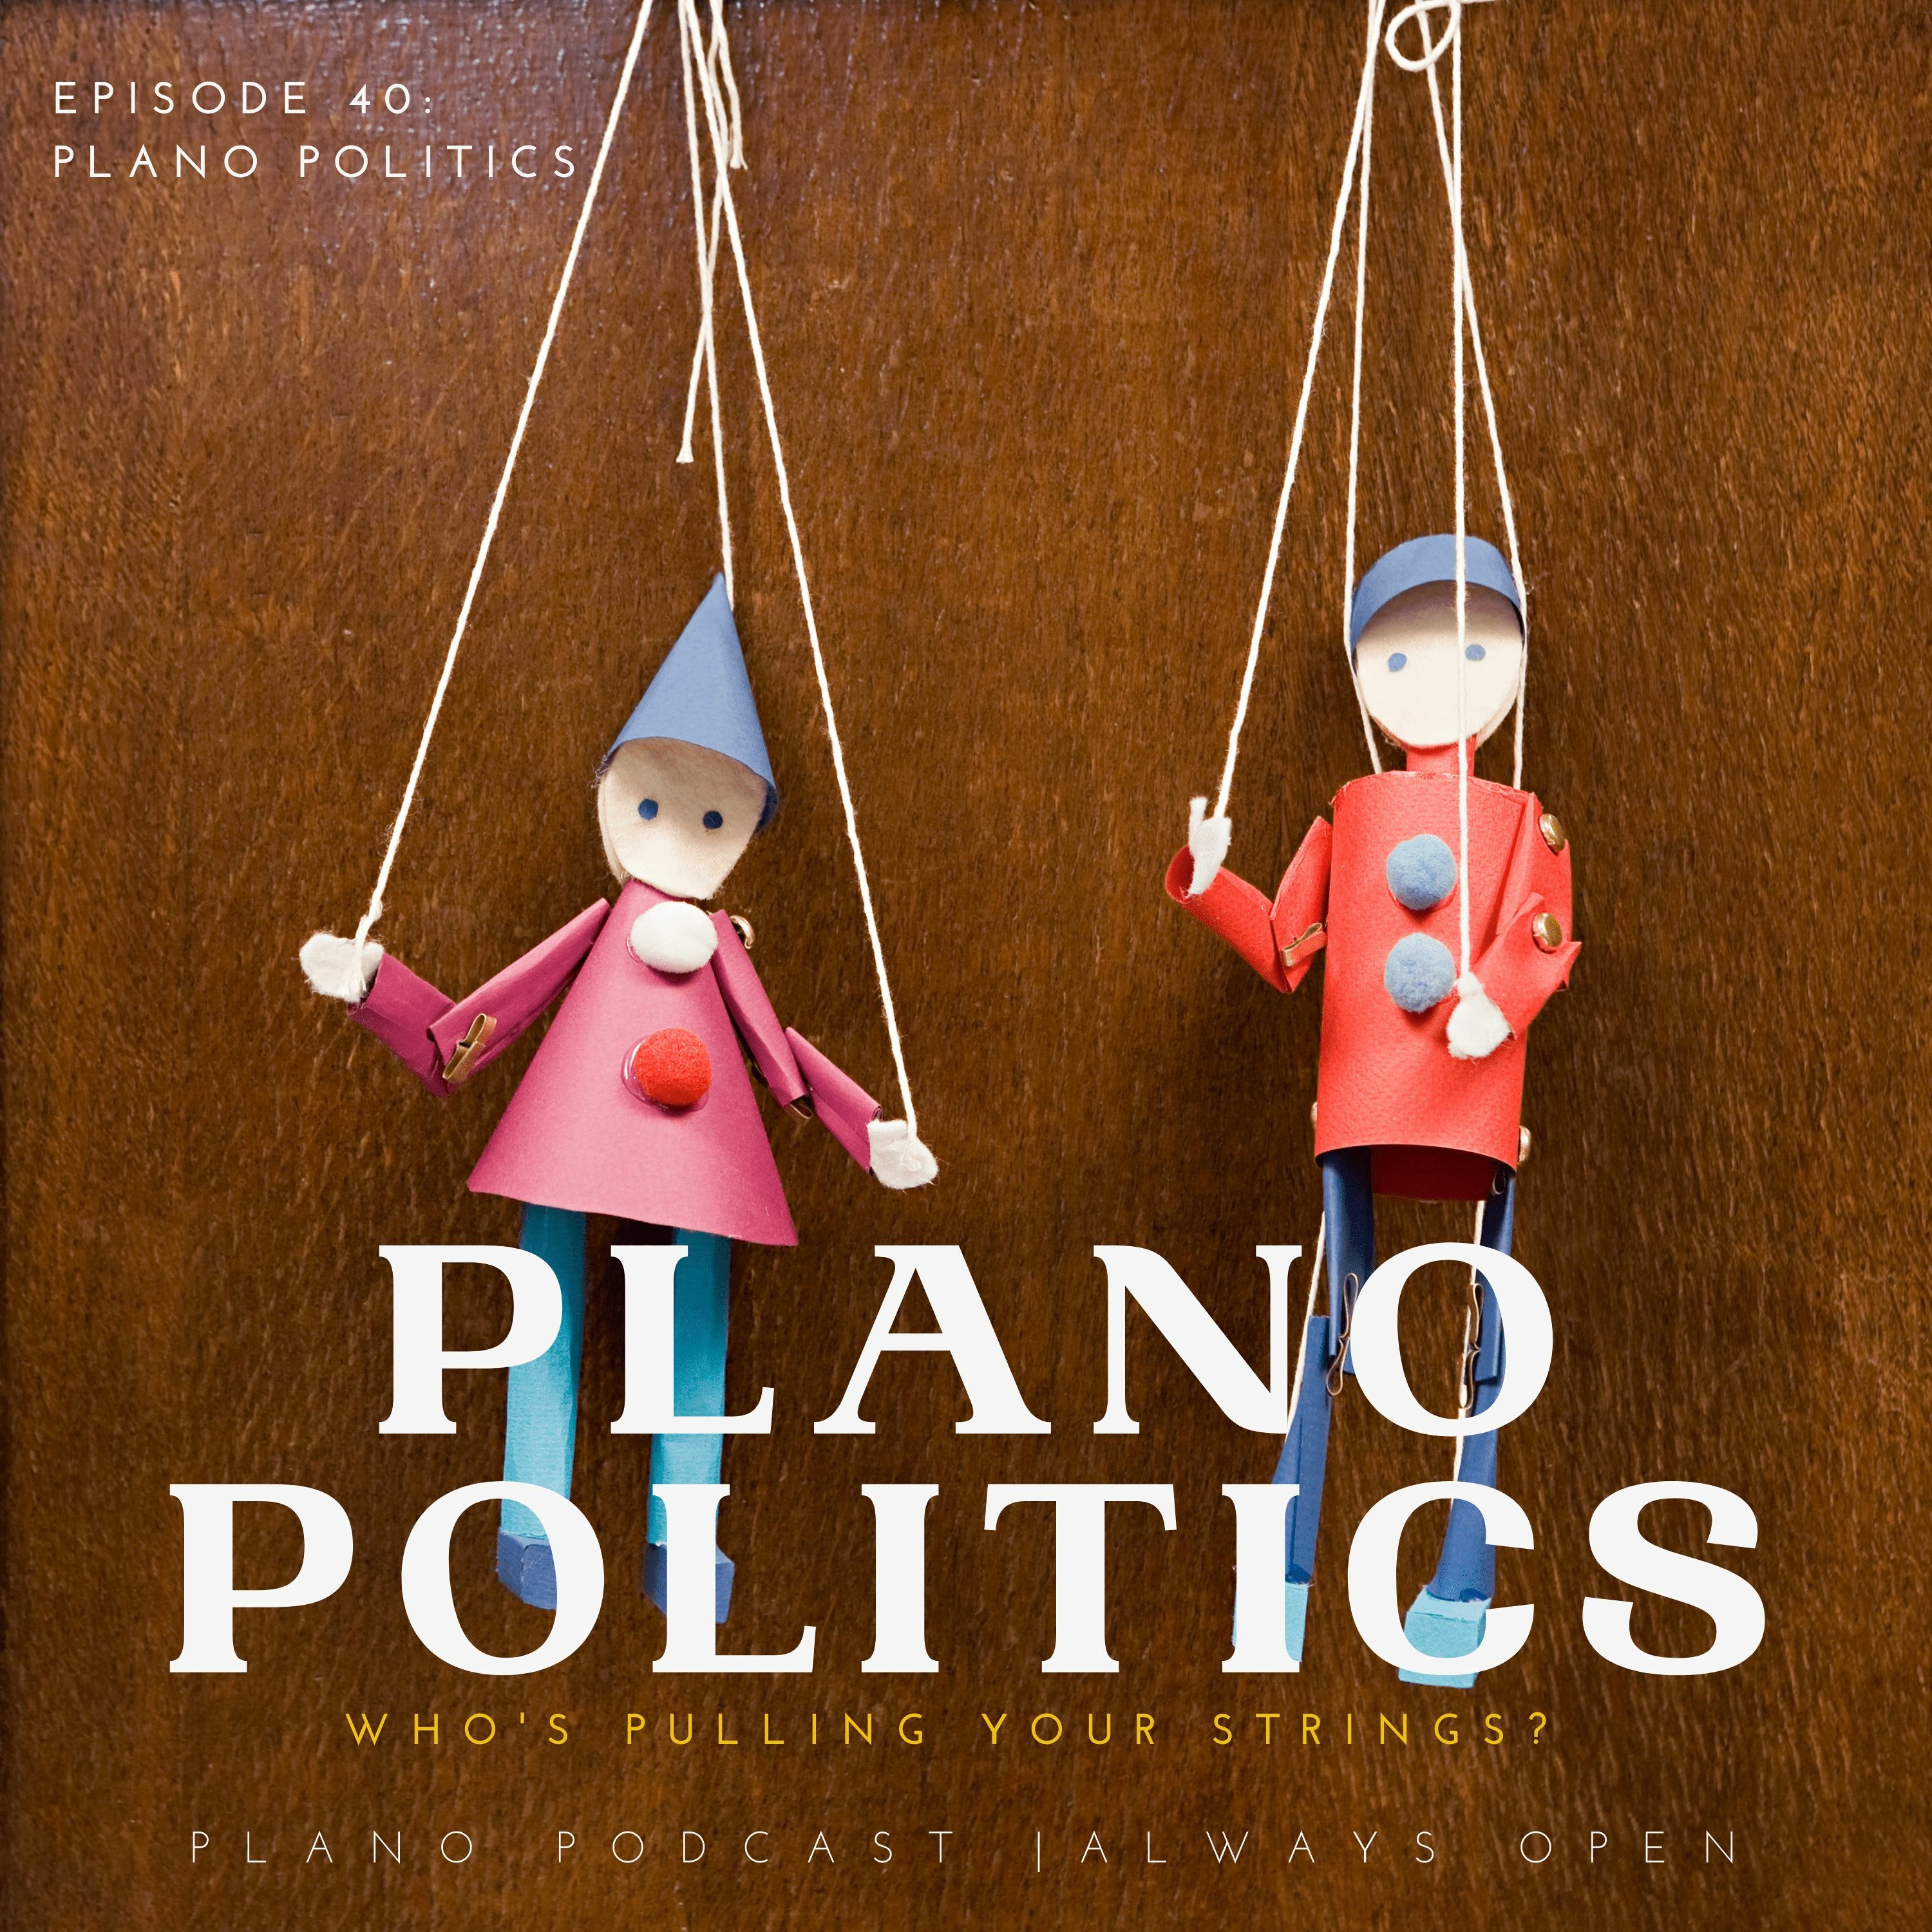 Episode 40 Plano Politics | Who's Pulling Your Strings